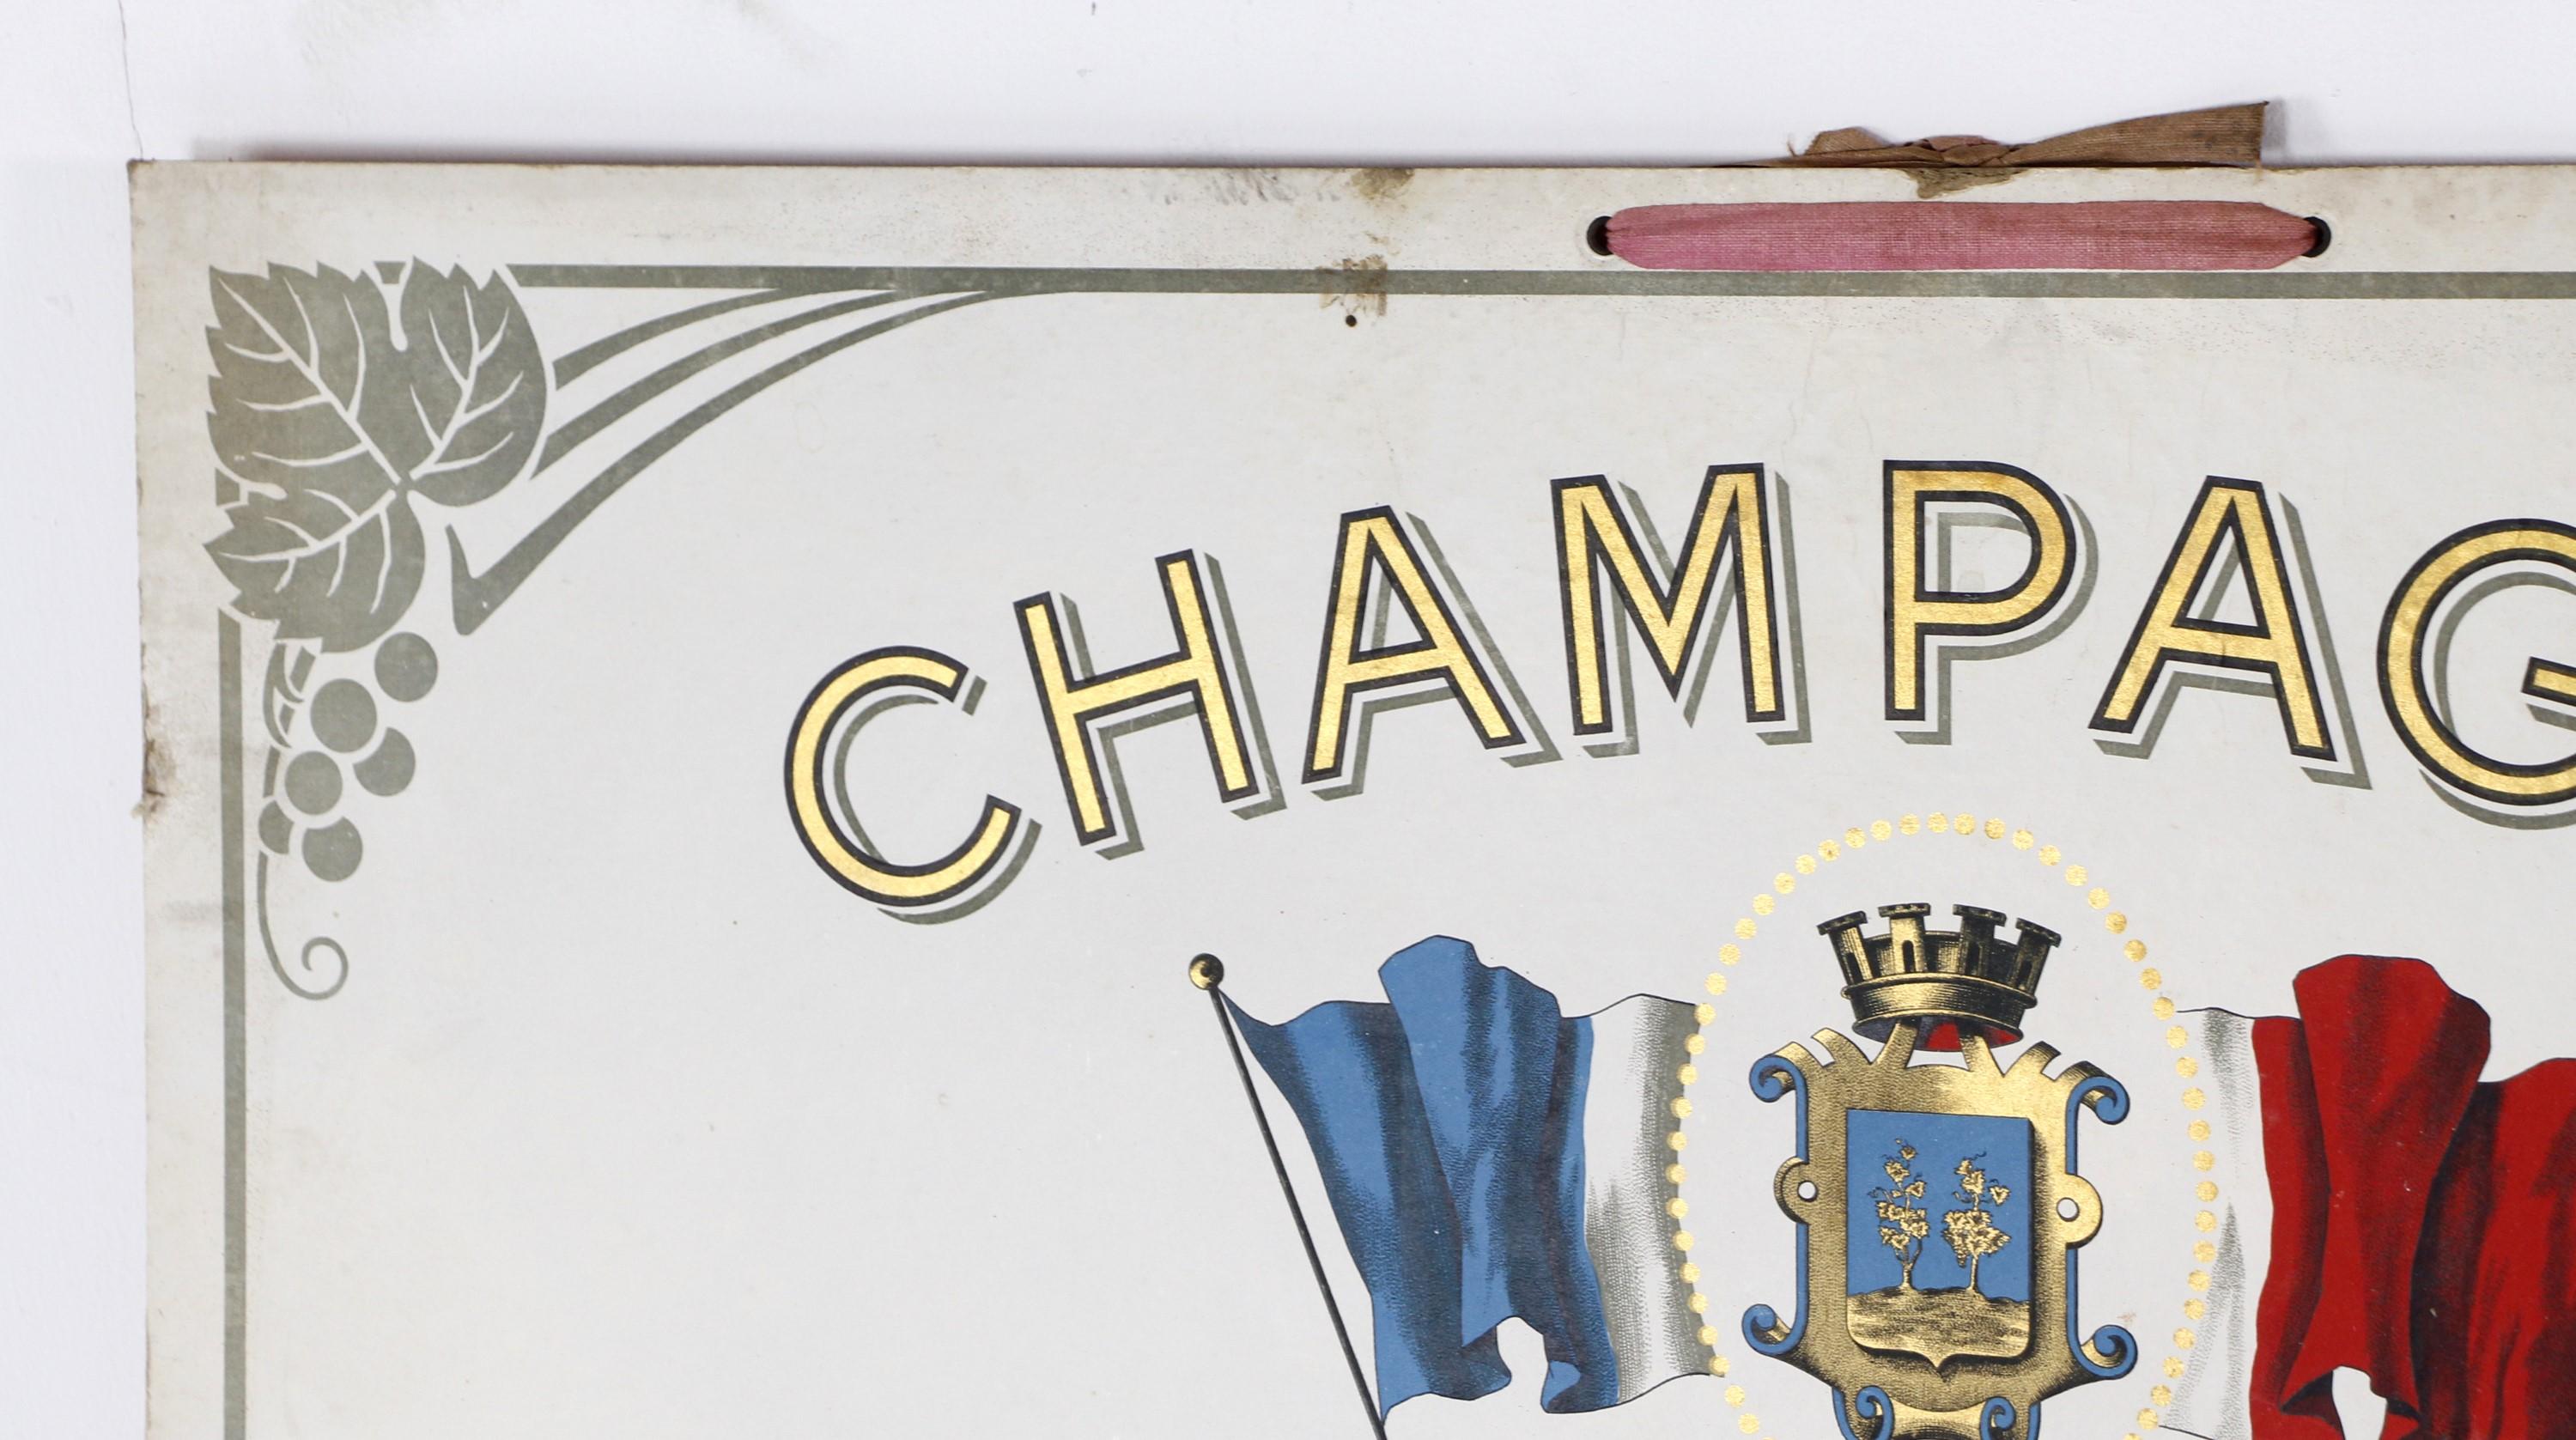 European Champagne Point Carre & C. Sign For Sale 2